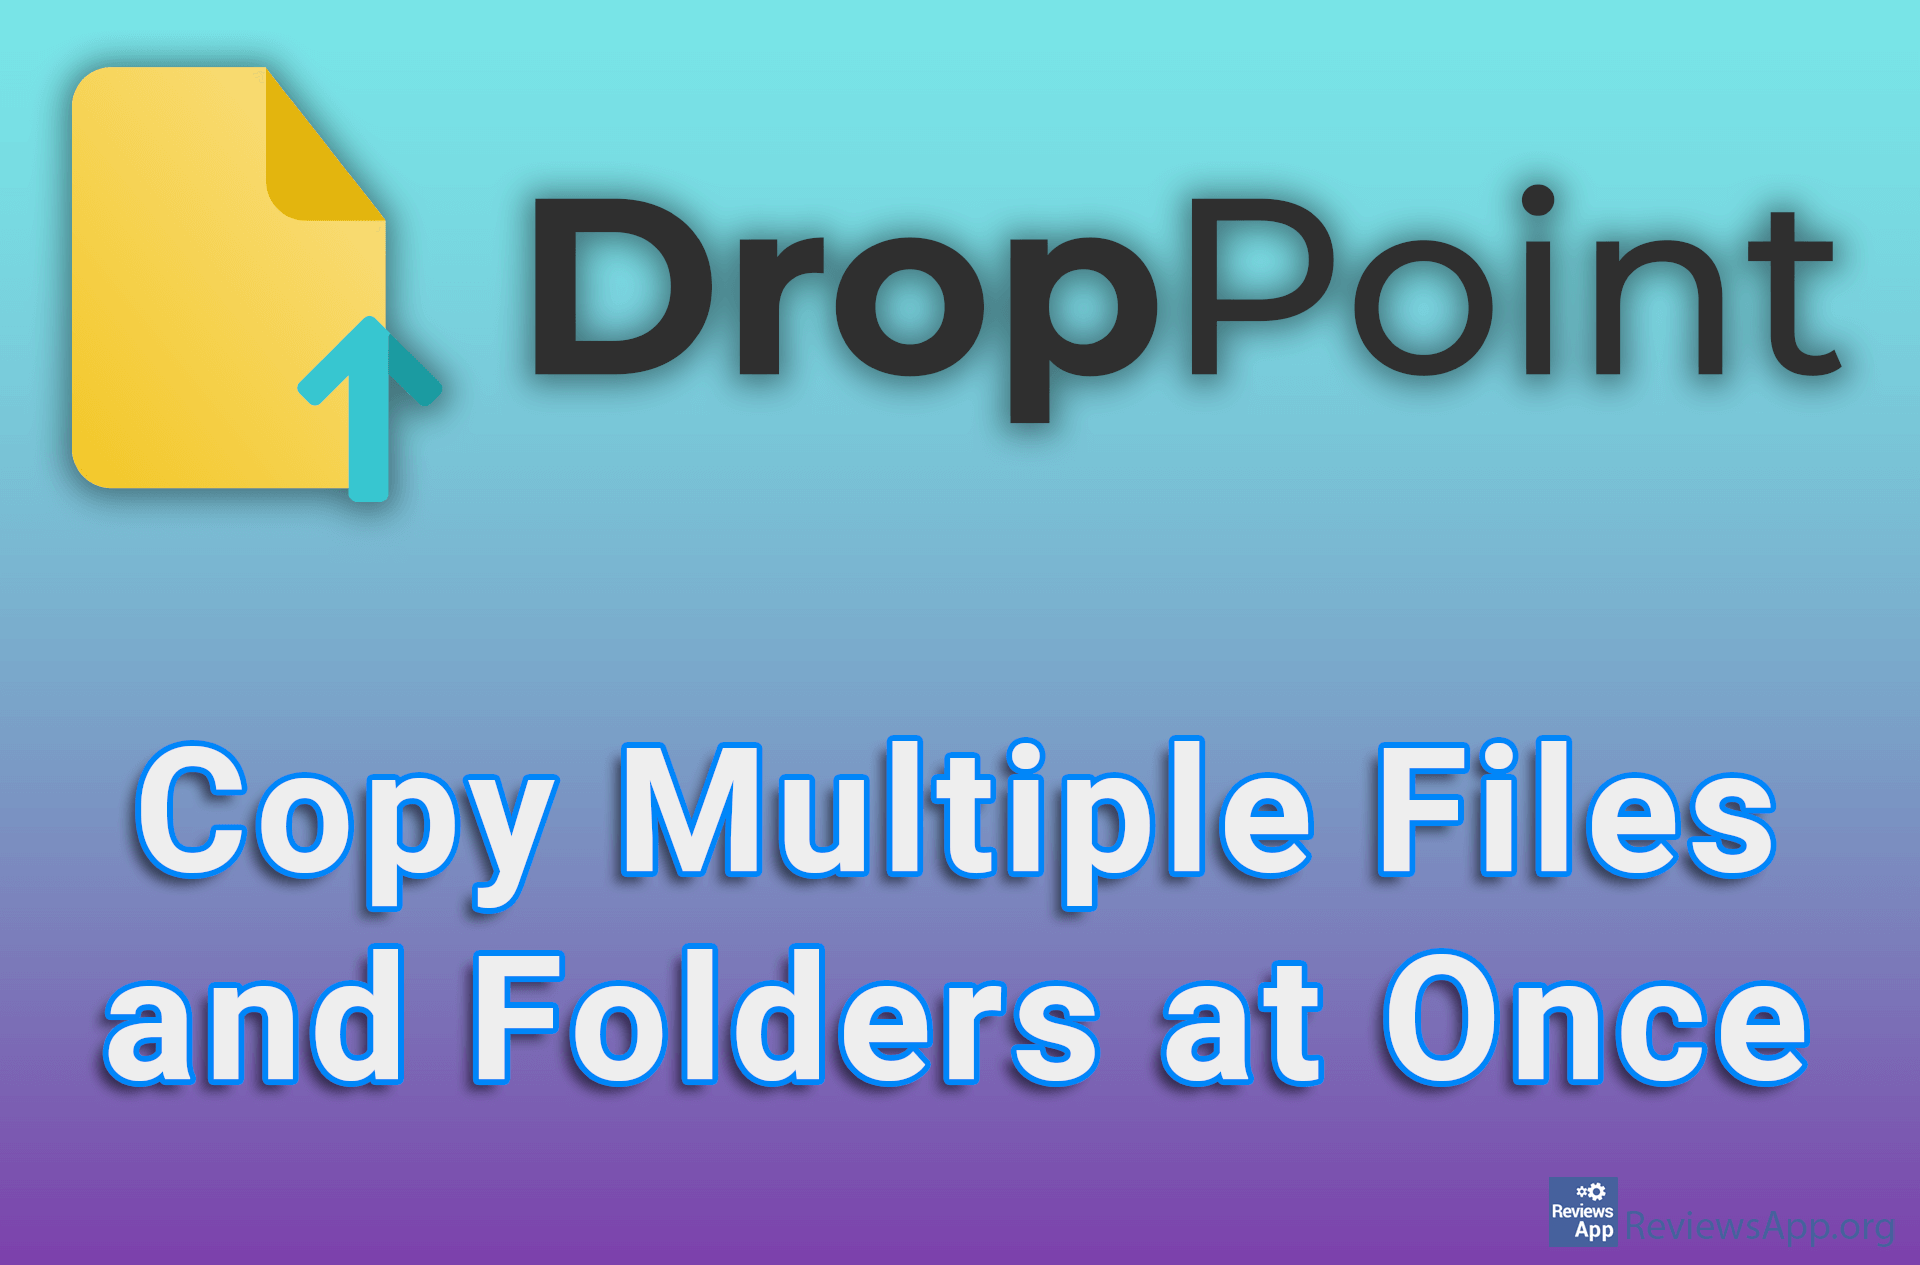 DropPoint – Copy Multiple Files and Folders at Once